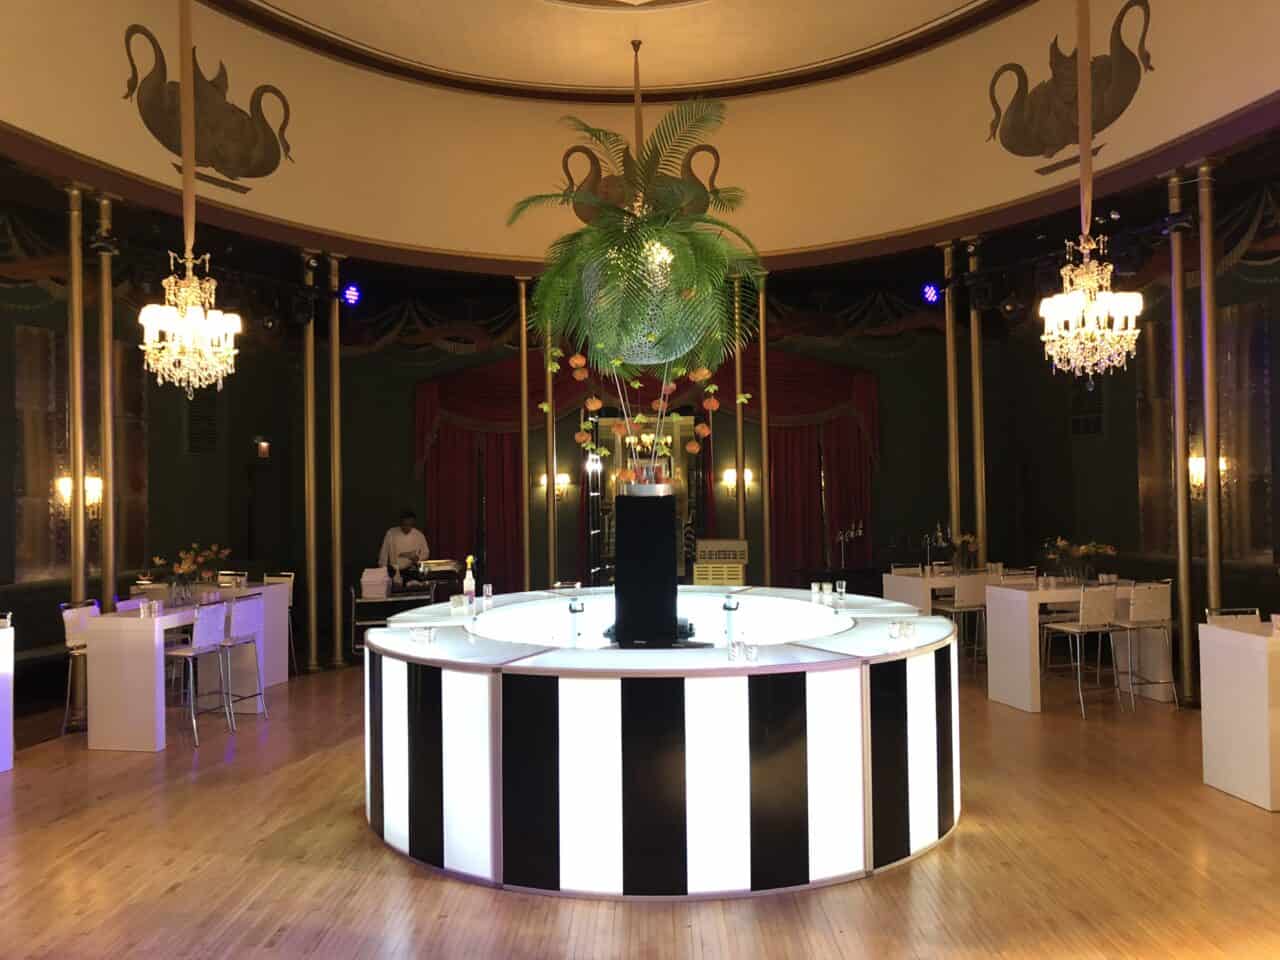 Curved bars with branding-modern event rental